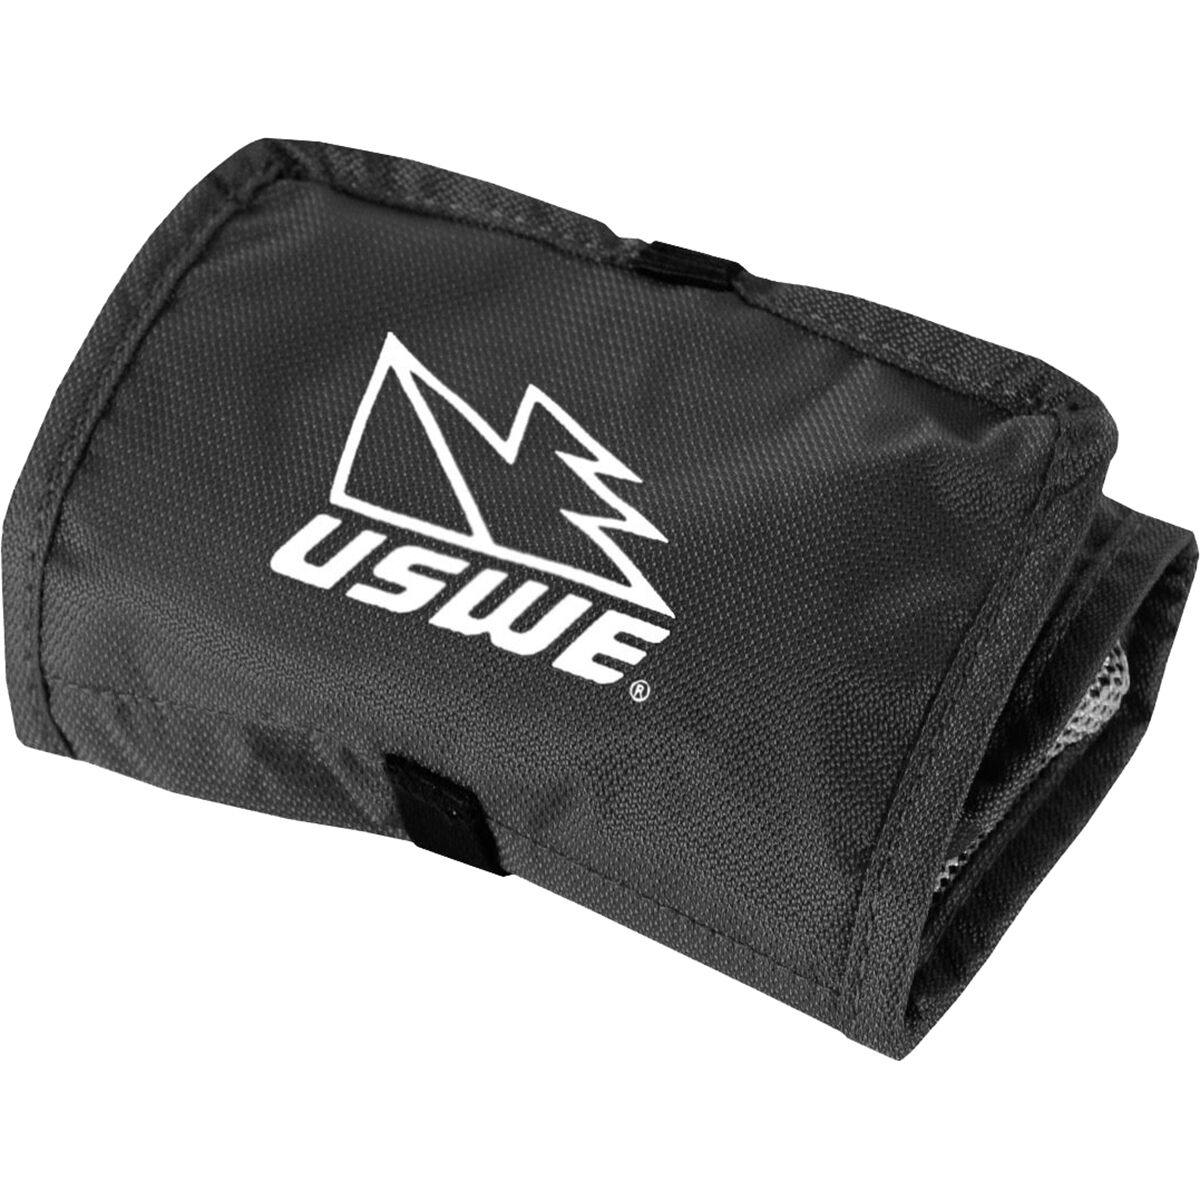 USWE Tool Pouch - Black